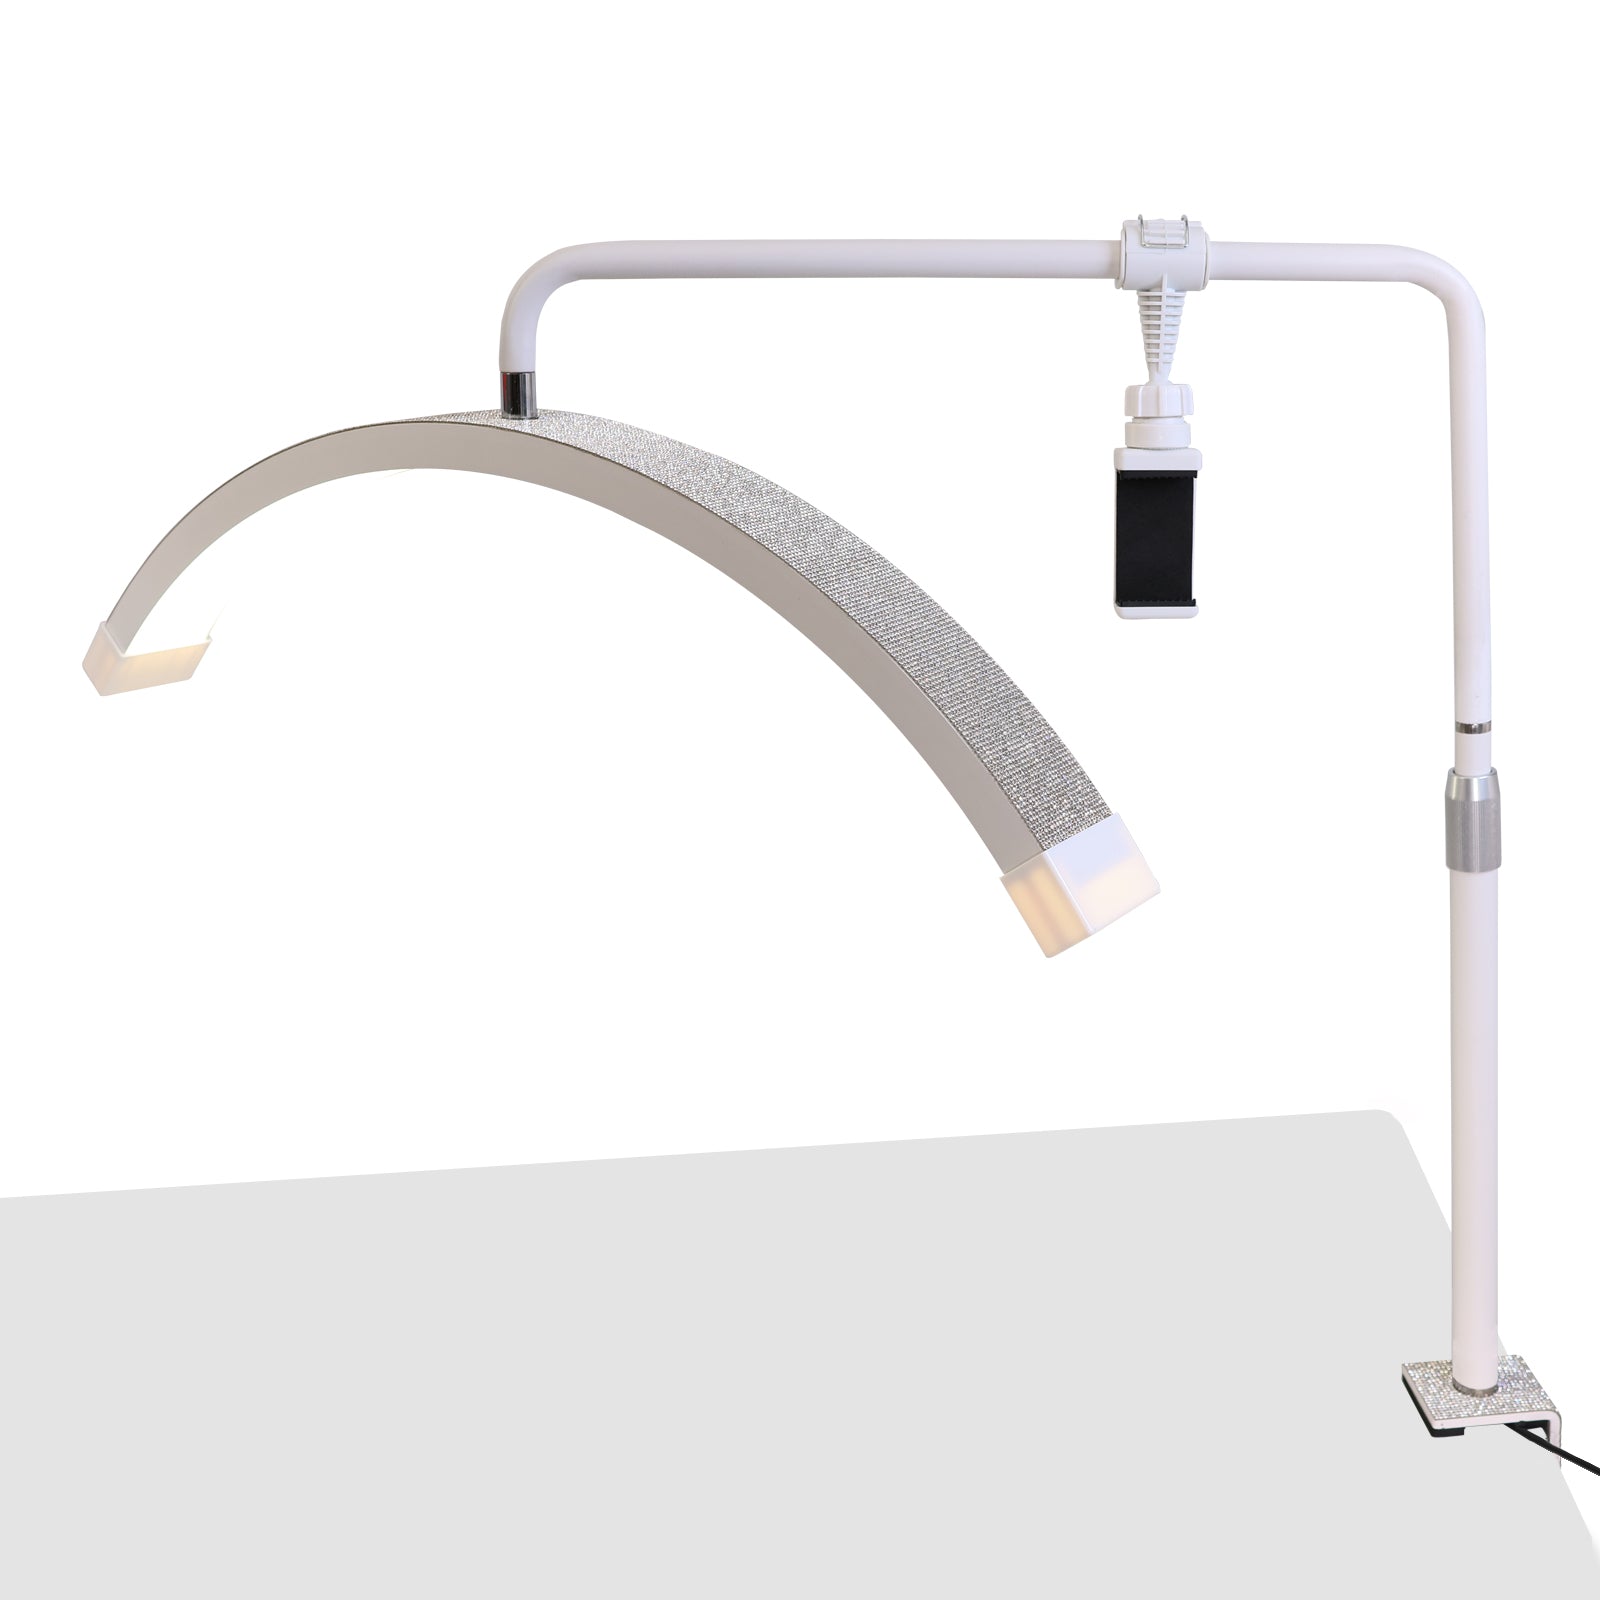 MOON ARCH LIGHT - BENCH/BED CLAMP BASE